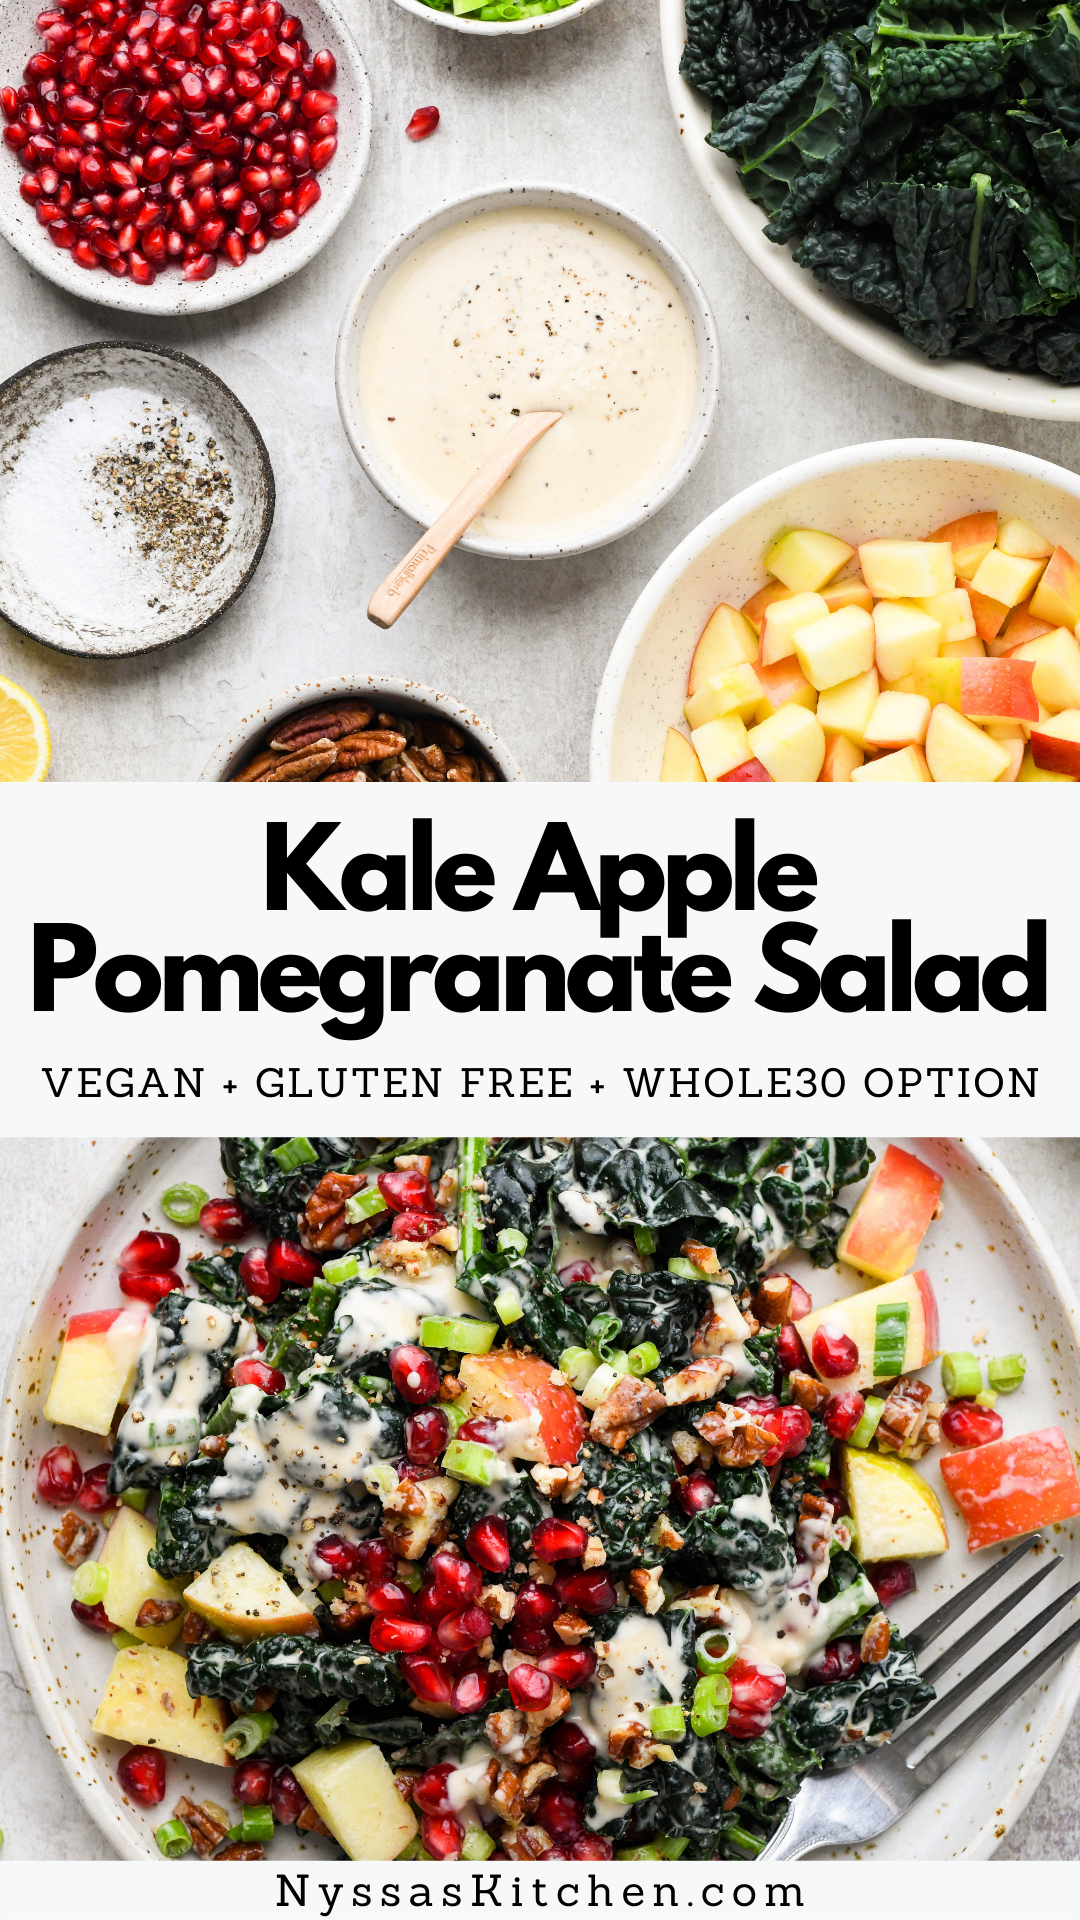 This kale apple pomegranate salad is a bright and festive winter salad that's perfect for the holidays and every day dinners! Made with nutrient dense ingredients like kale, apples, pecans, green onions, pomegranate, and a creamy tahini based dressing. It would make a delicious and colorful addition to your Thanksgiving or Christmas dinner. Gluten free, vegan, paleo, Whole30 option.